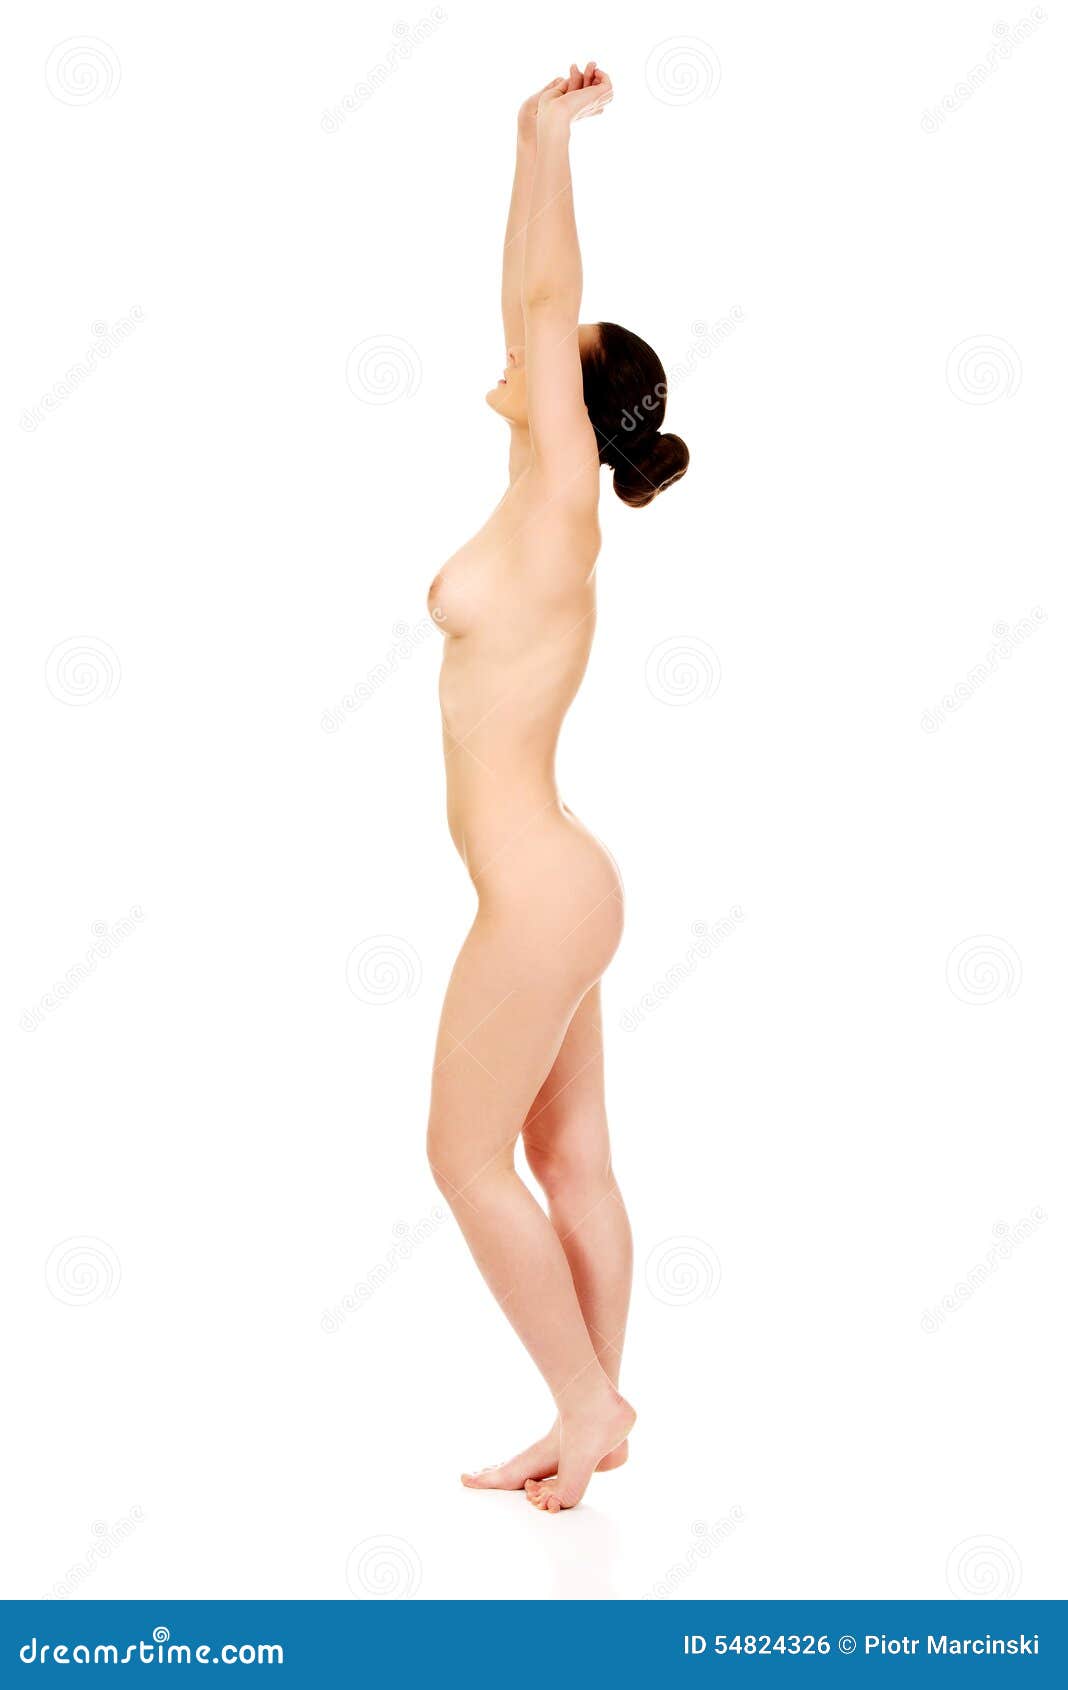 Nude Woman Stretching Arms. Stock Photo - Image of adult, naked: 54824326